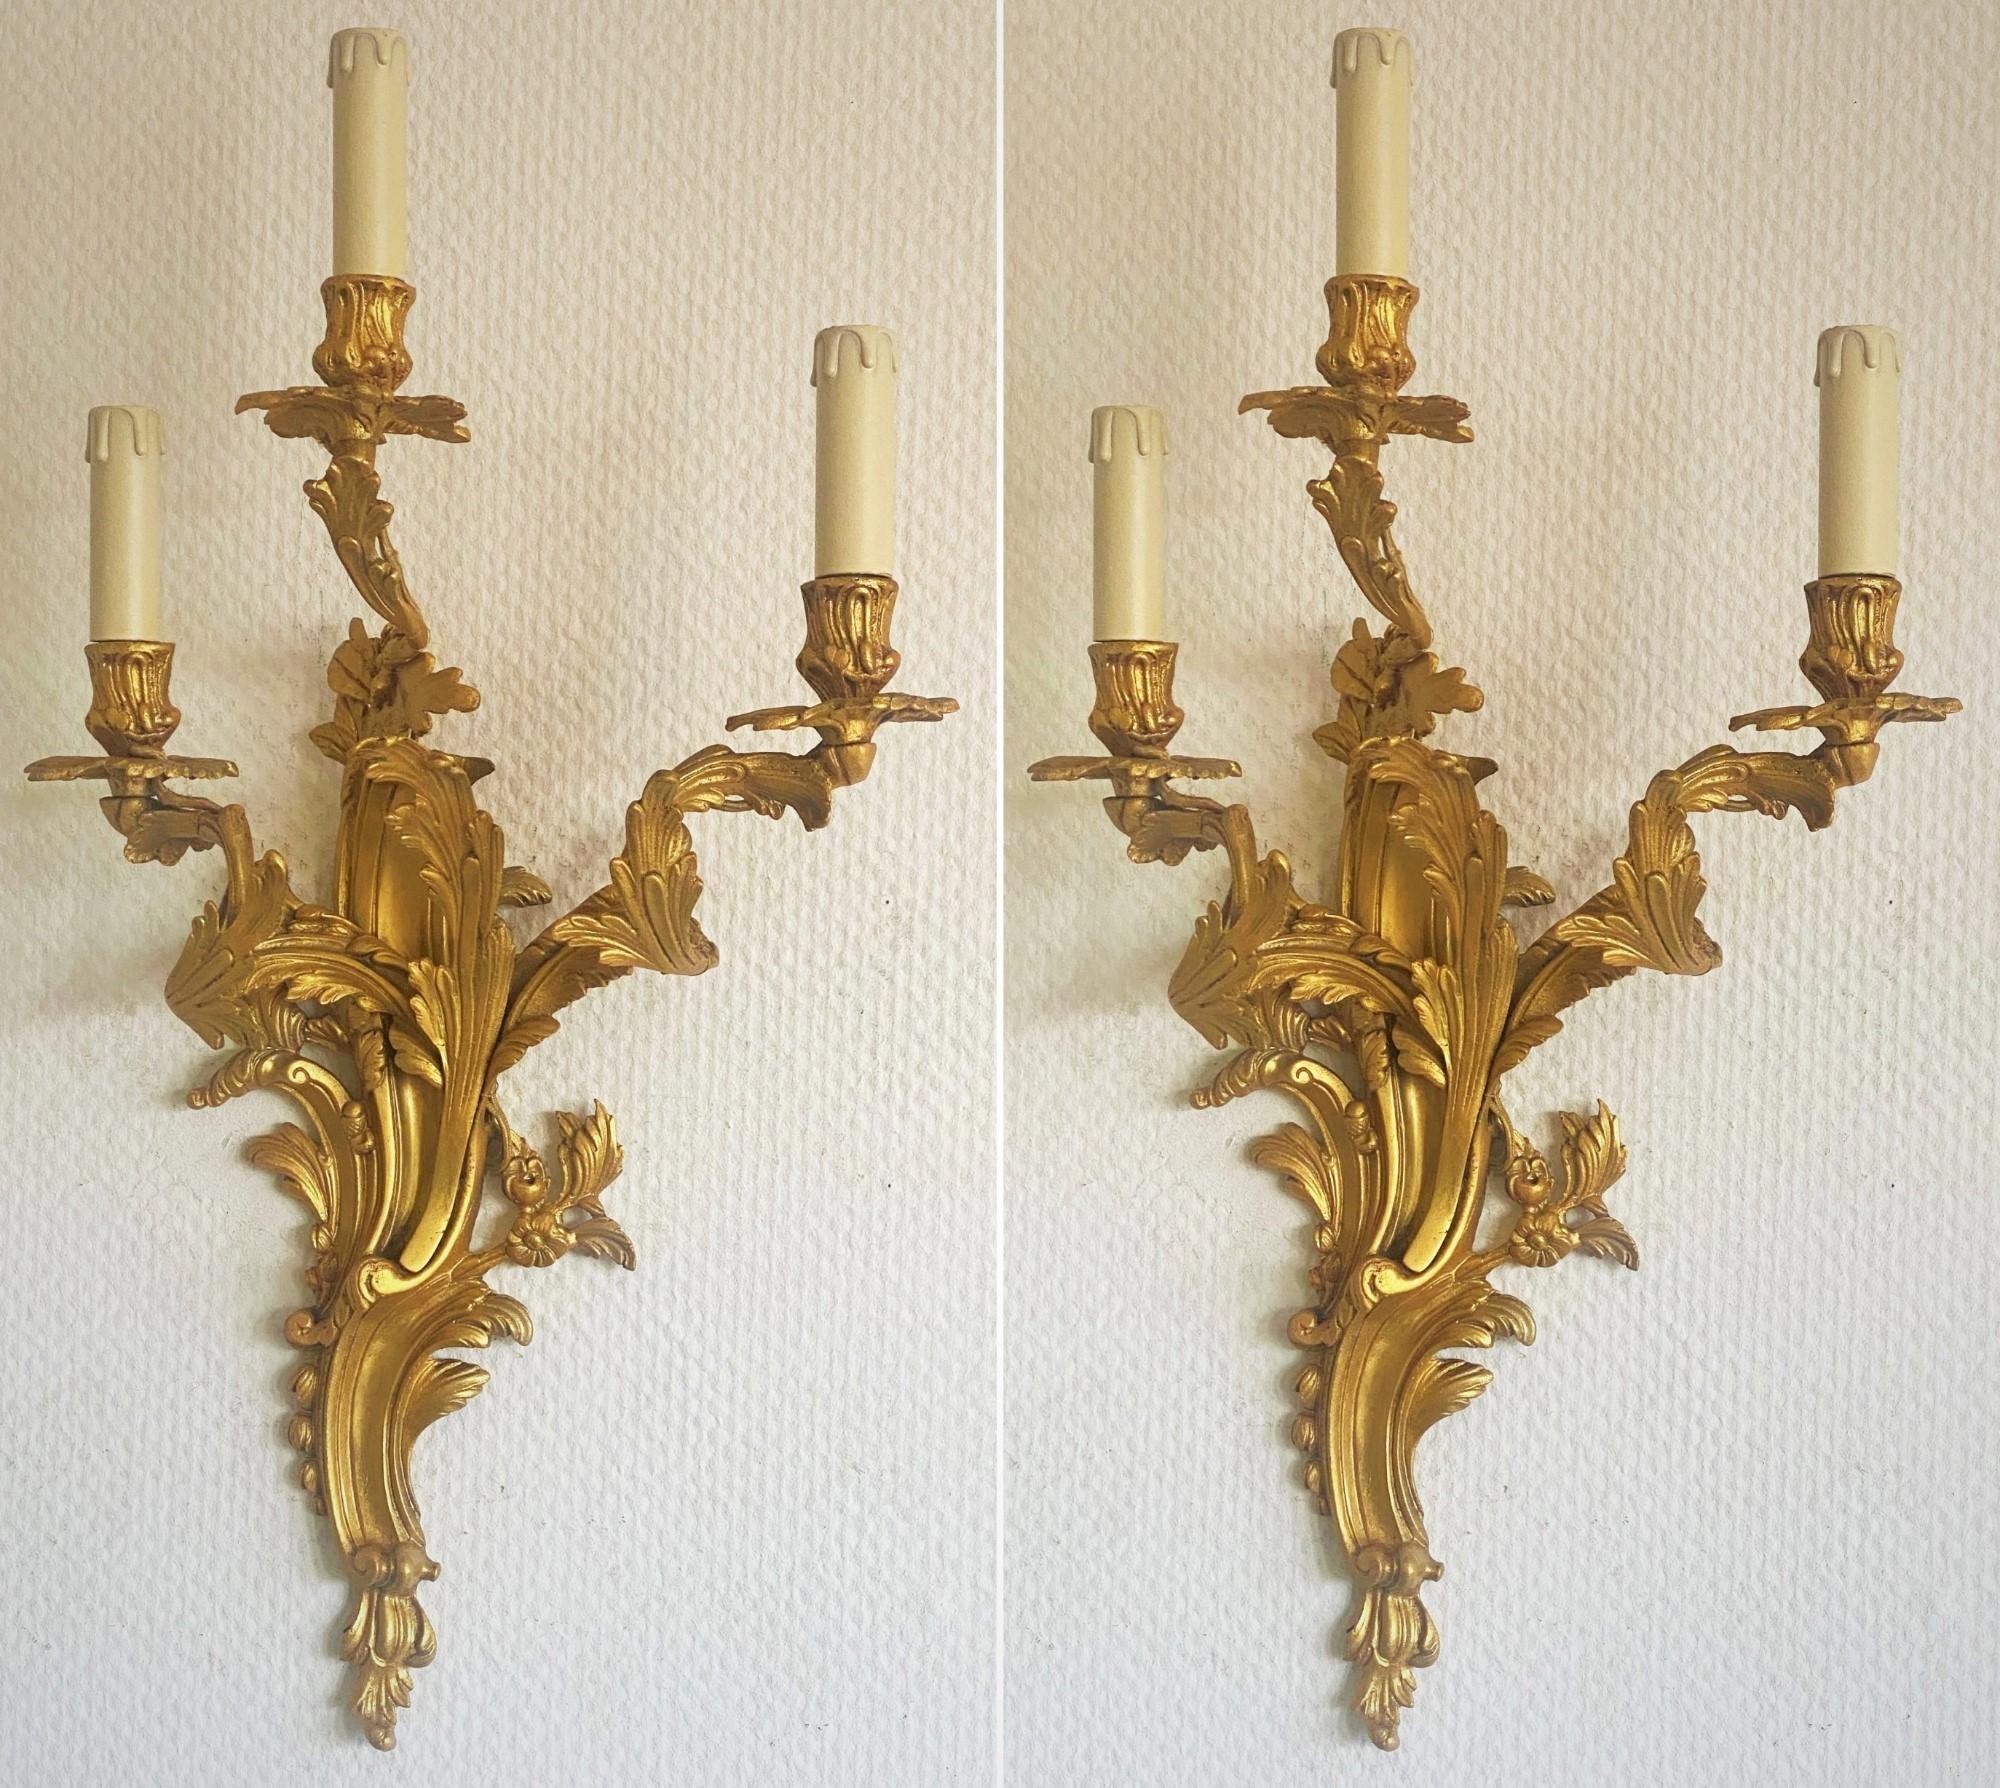 Pair of heavy, tall Louis XVI style gilt doré bronze electrified wall sconces, three-arm richly decorated with scrollwork foliage, France, late 19th century. High quality solid doré bronze fire-gilded finish, professional electrified at a later time